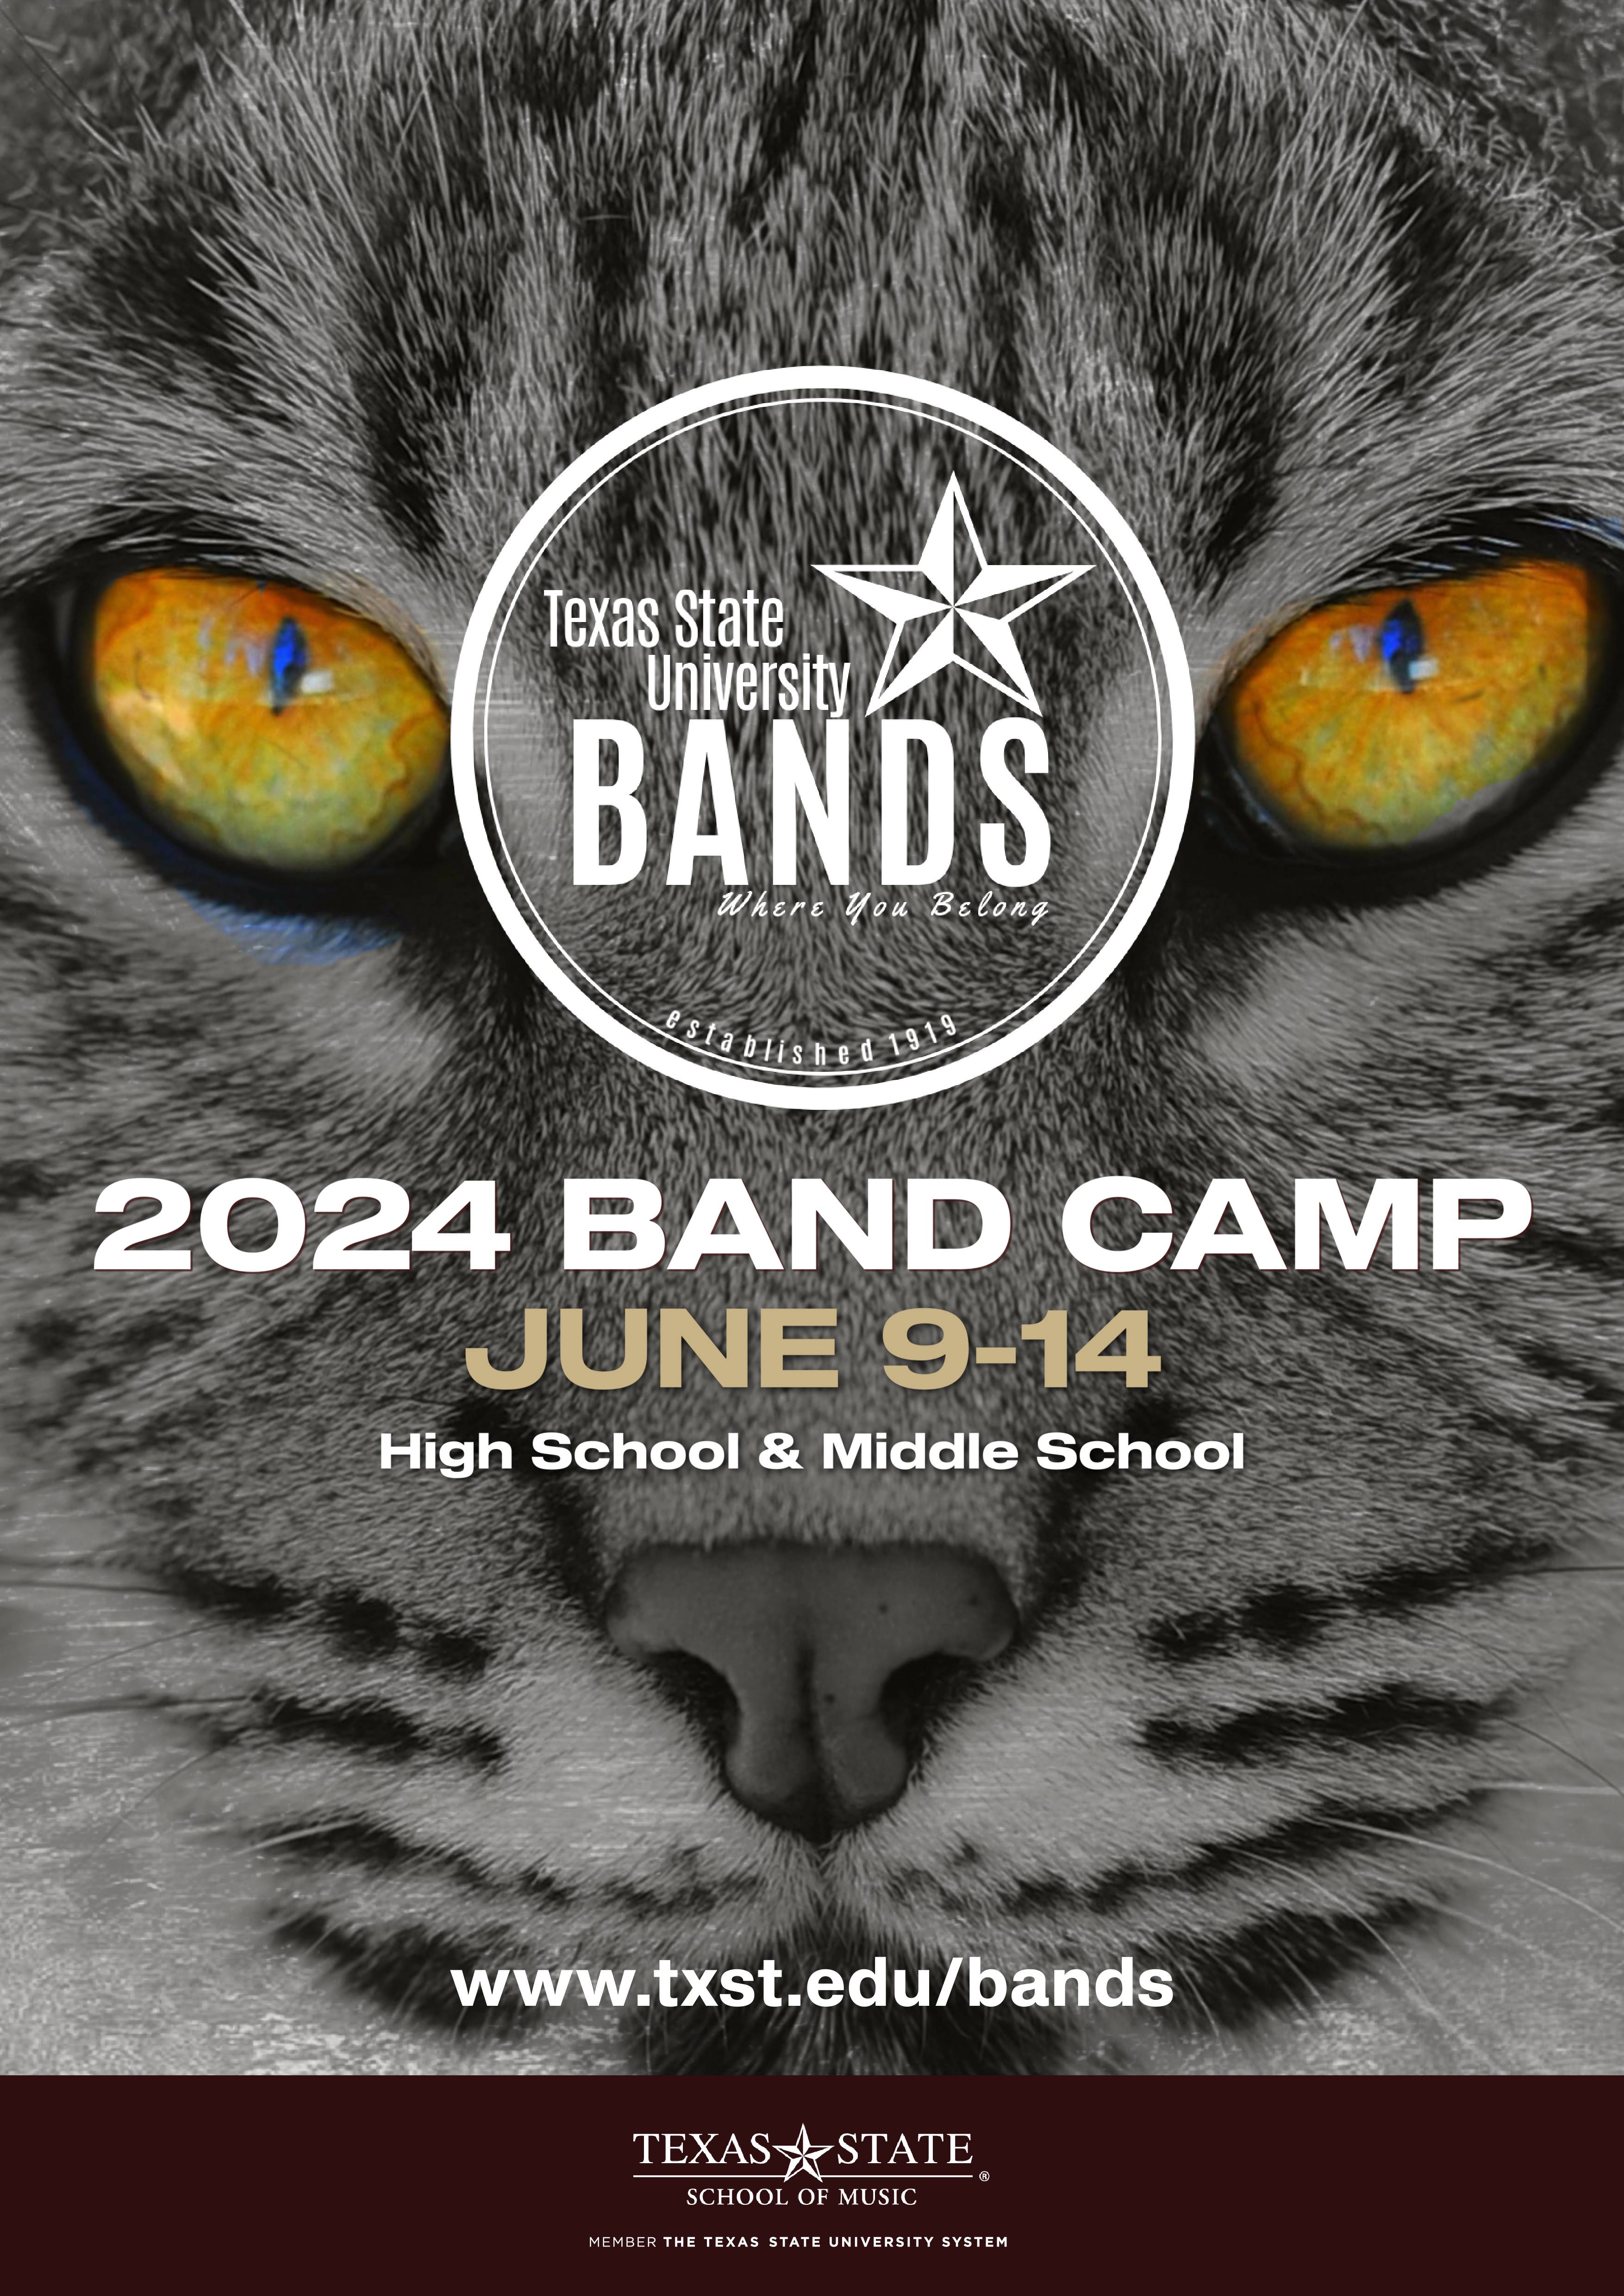 HS/MS Concert Band Camps Texas State University Bands Texas State